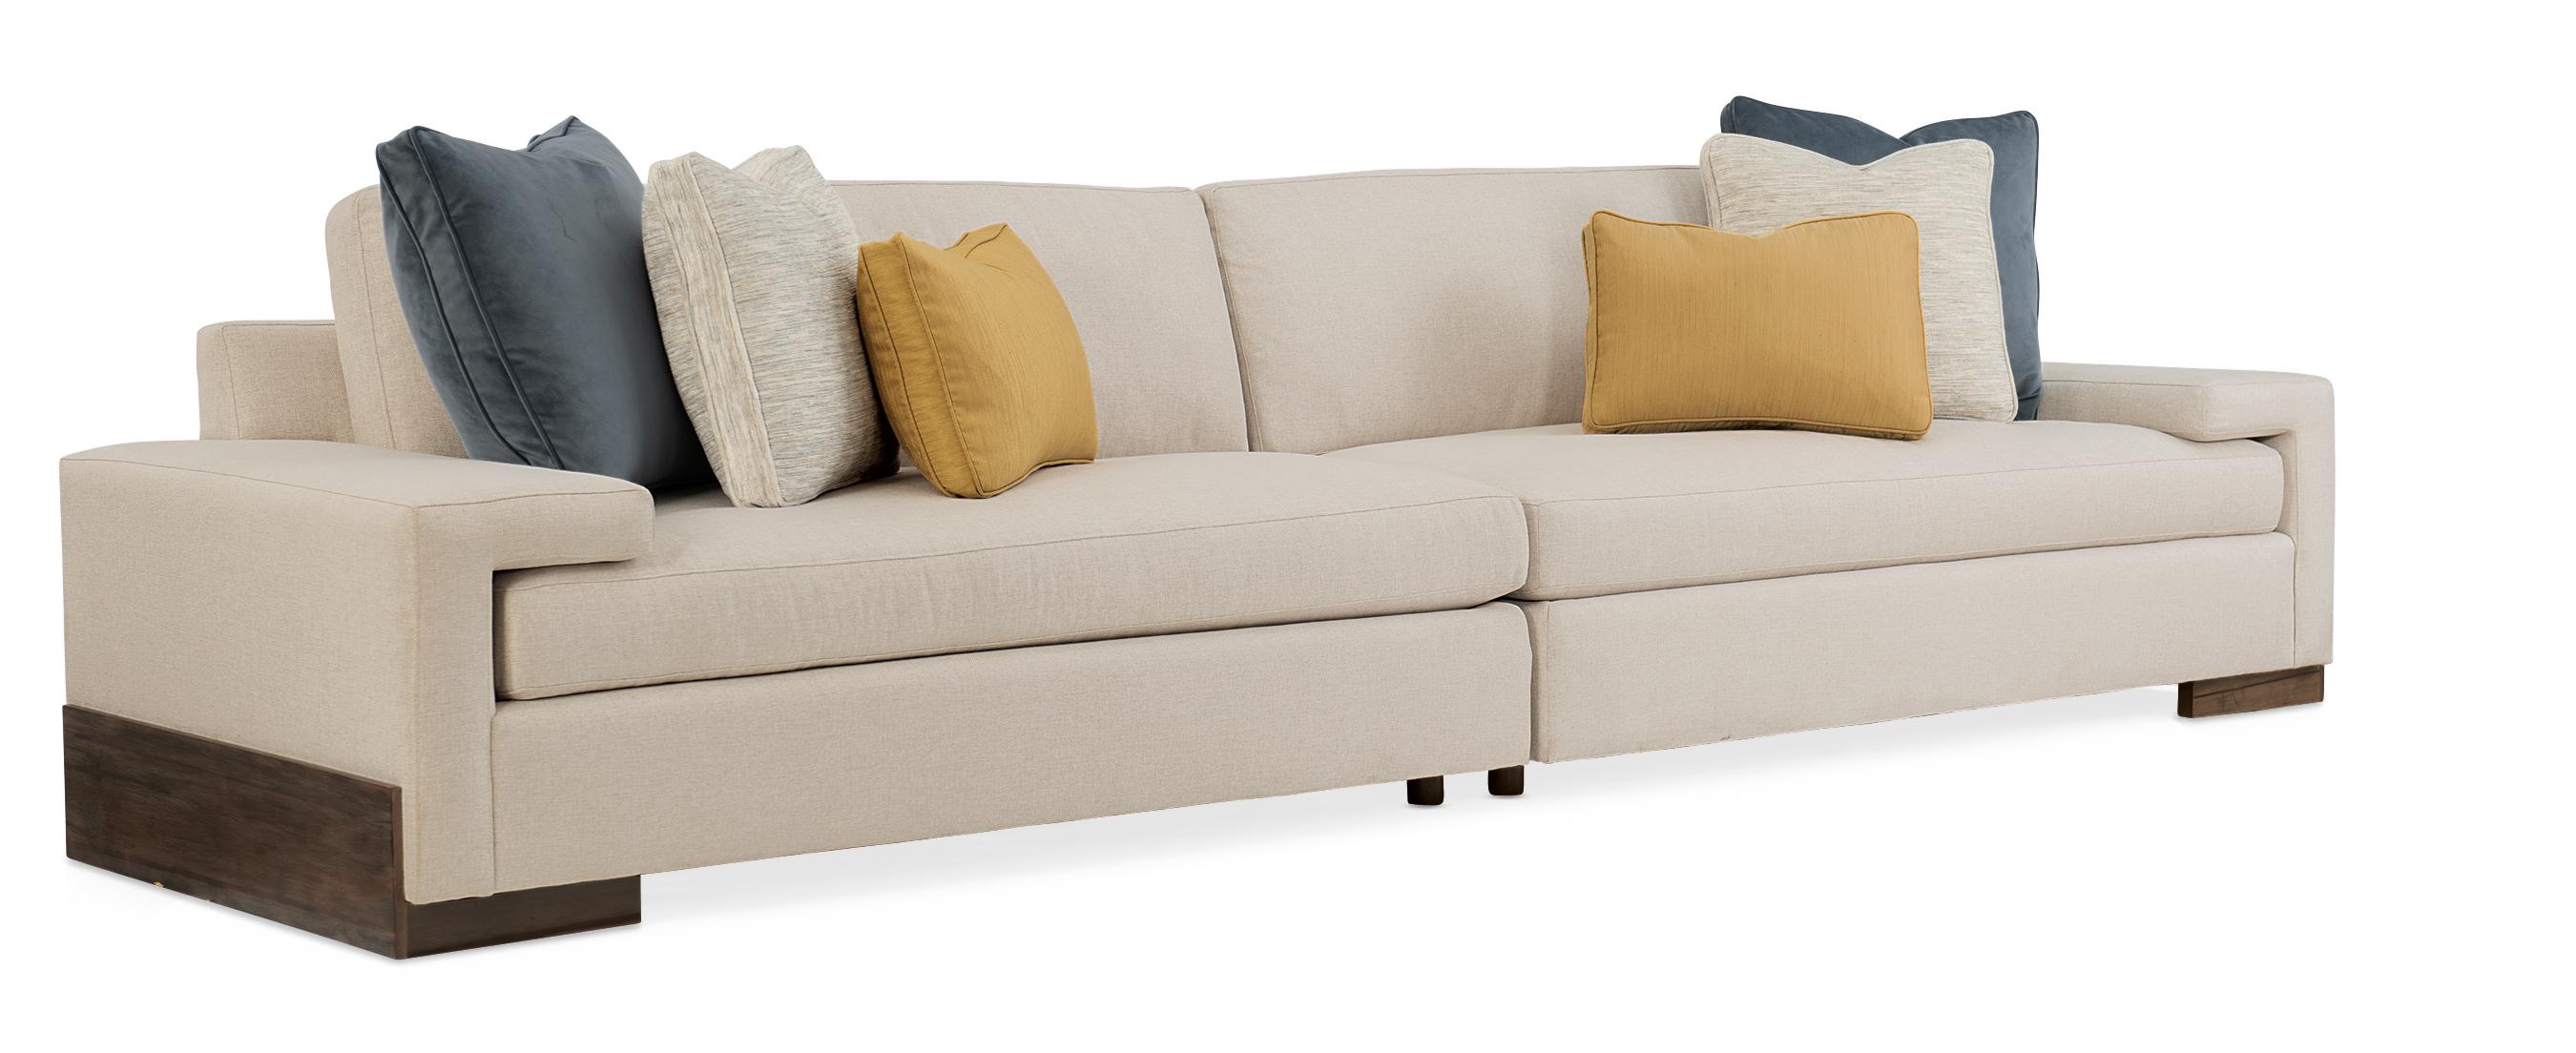 Contemporary Sectional Sofa I'M SHELF-ISH M090-018-SEC2-A in Sable Fabric